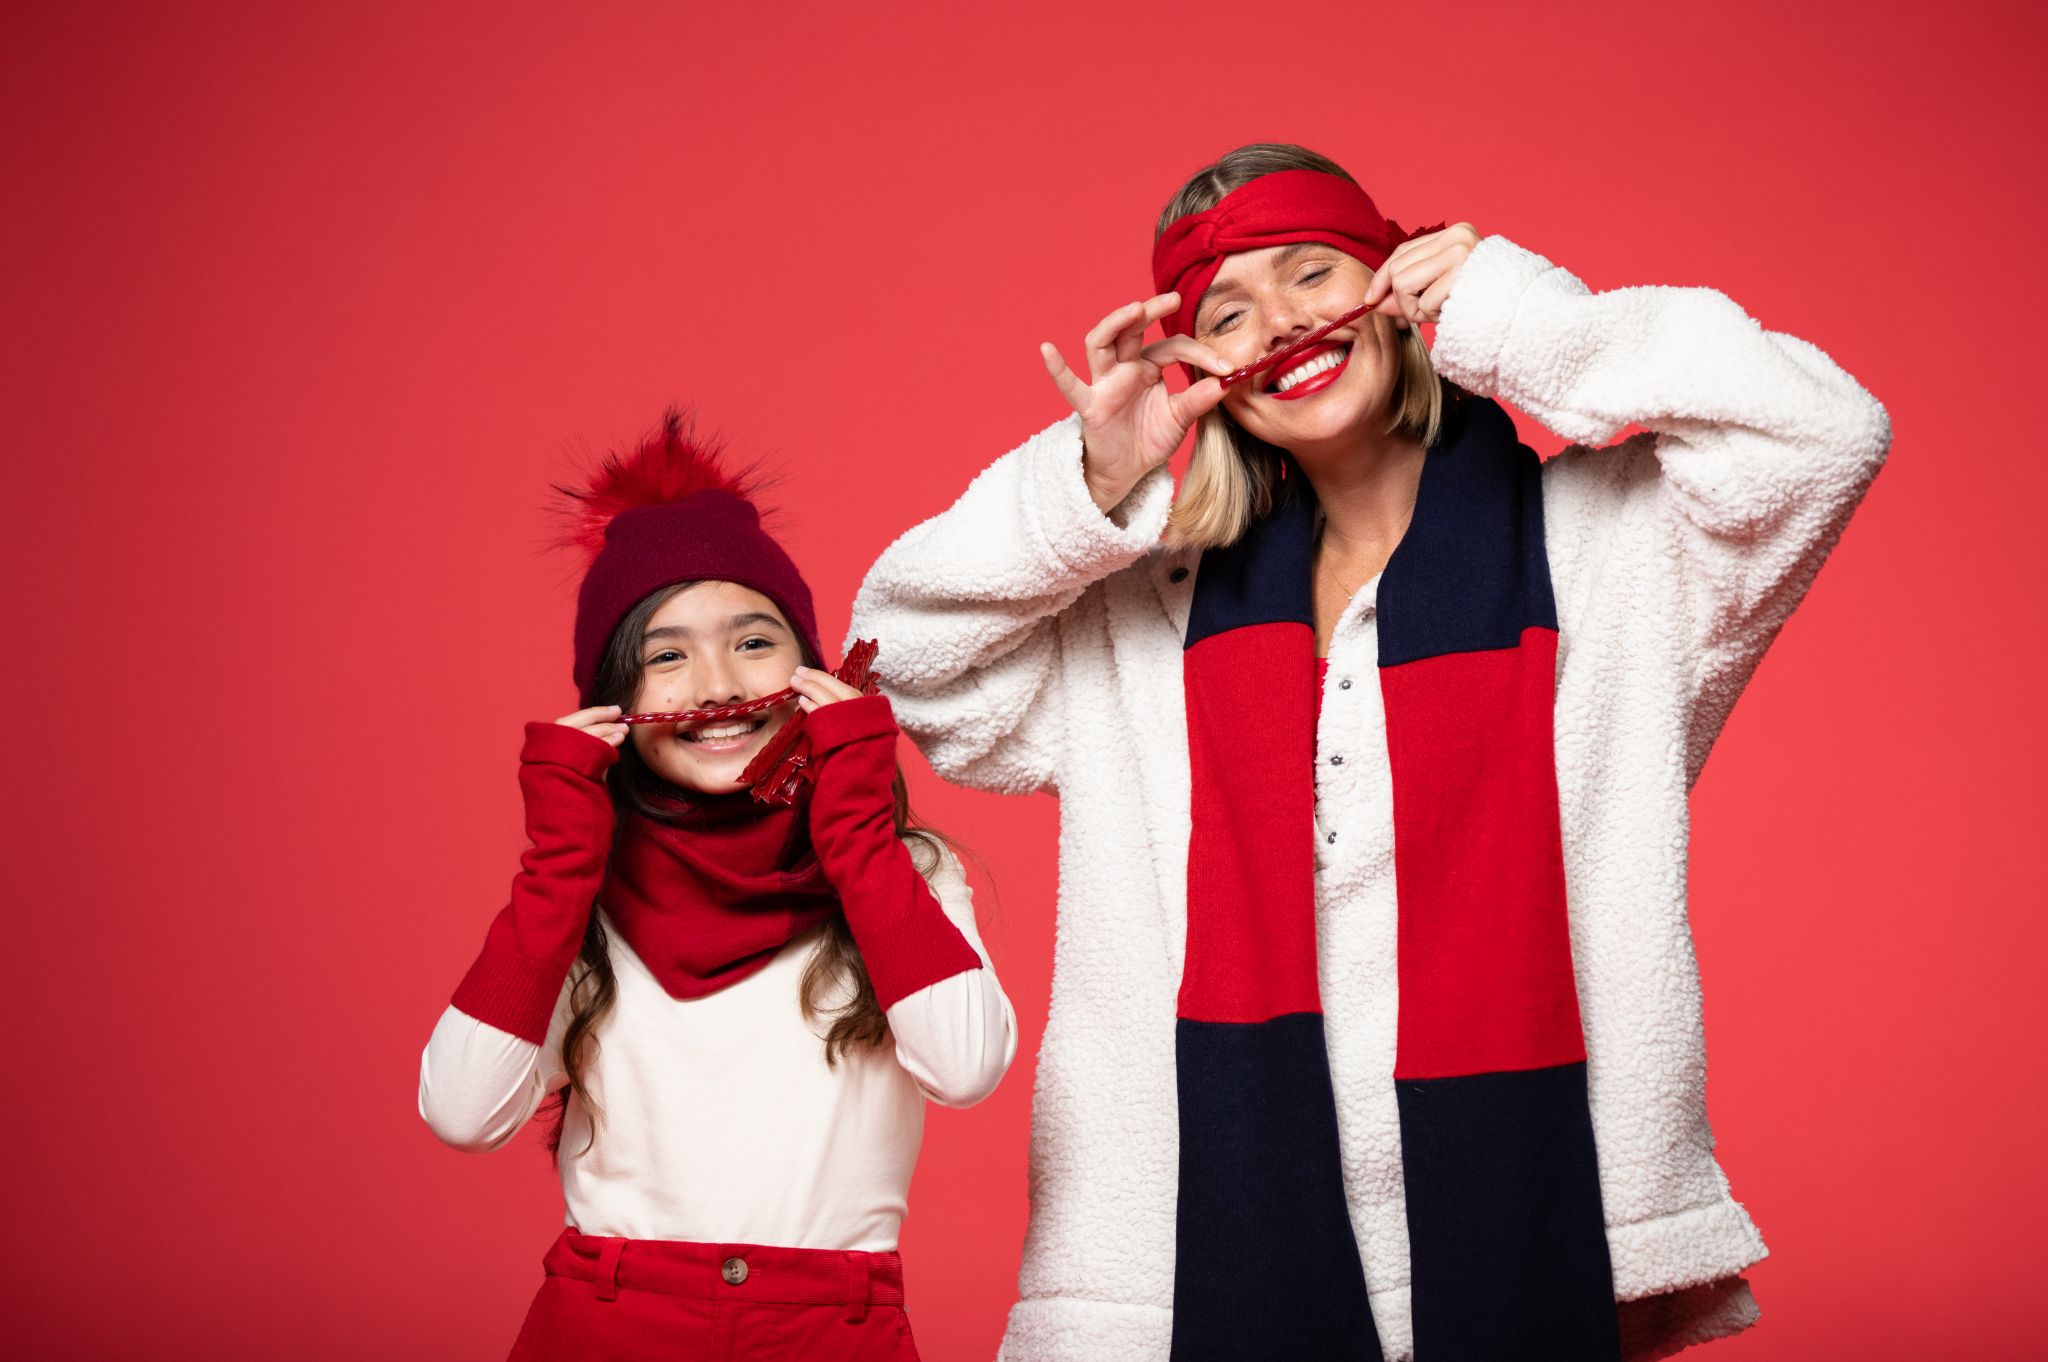 IU C&I Studios Portfolio BB Sheep Lifestyle Colors PROOF Girl model wearing red headband, scarf and pants along with white top and female model wearing red hand band, white jacket and black and red scarf against a red backdrop